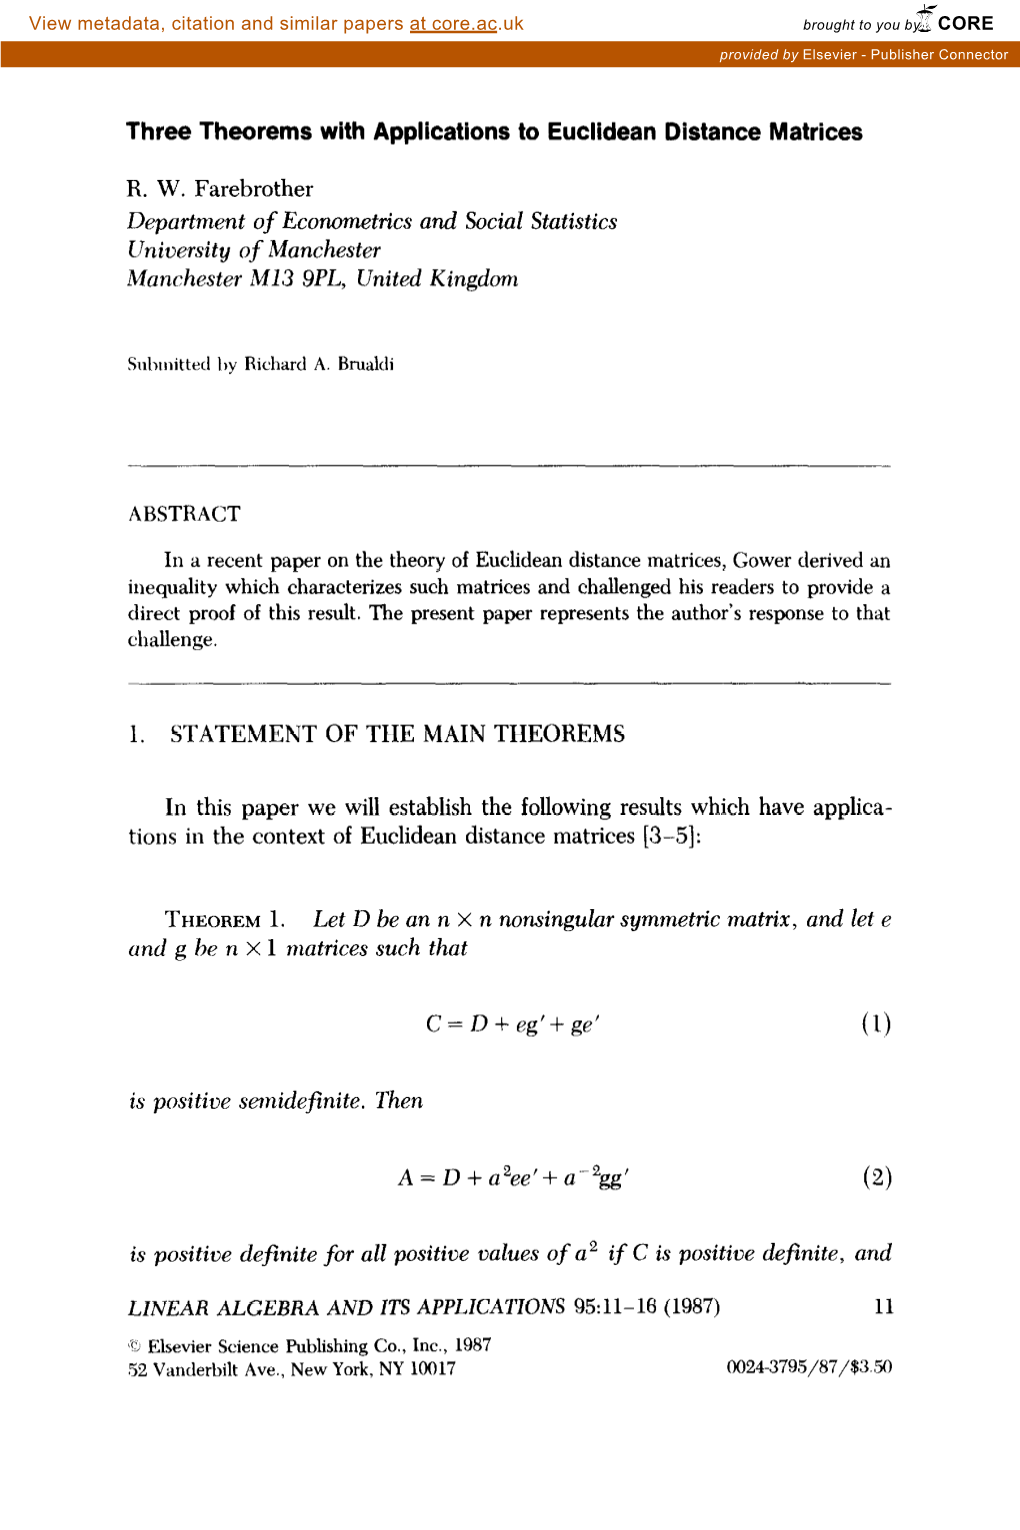 Three Theorems with Applications to Euclidean Distance Matrices